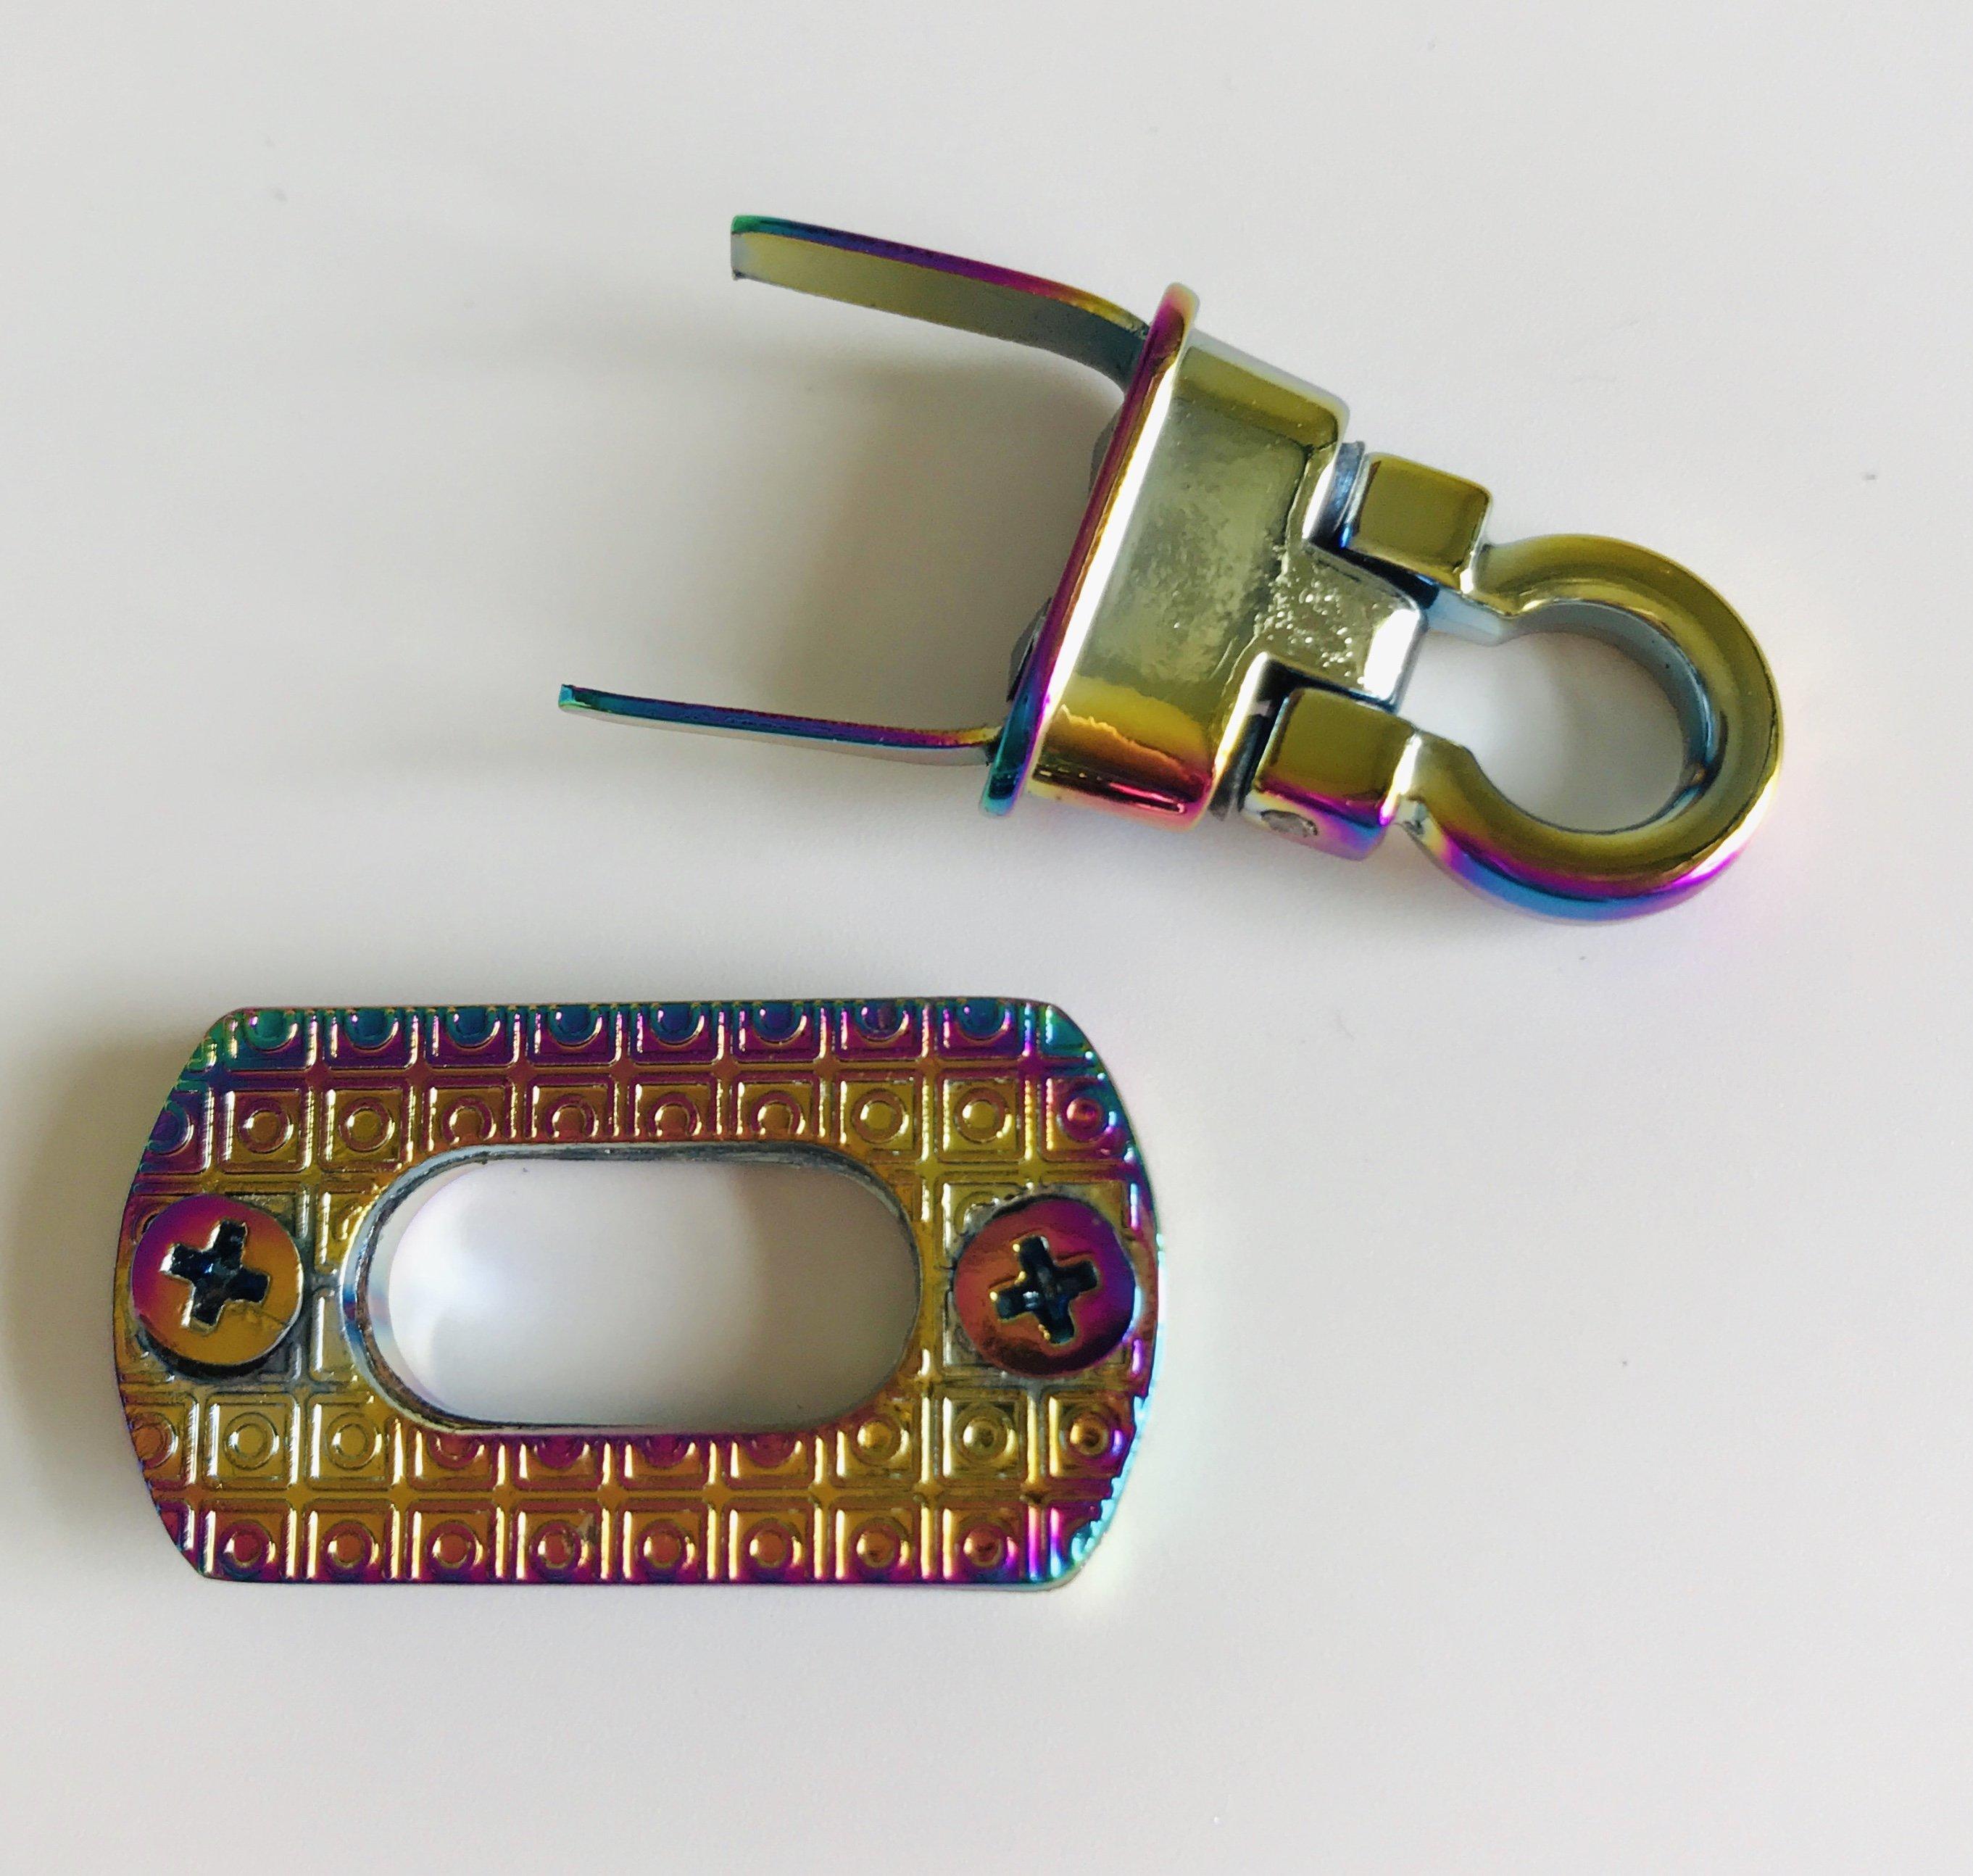 Bobbin Girl's Dinky flip lock in Rainbow colours comes in two parts for installation